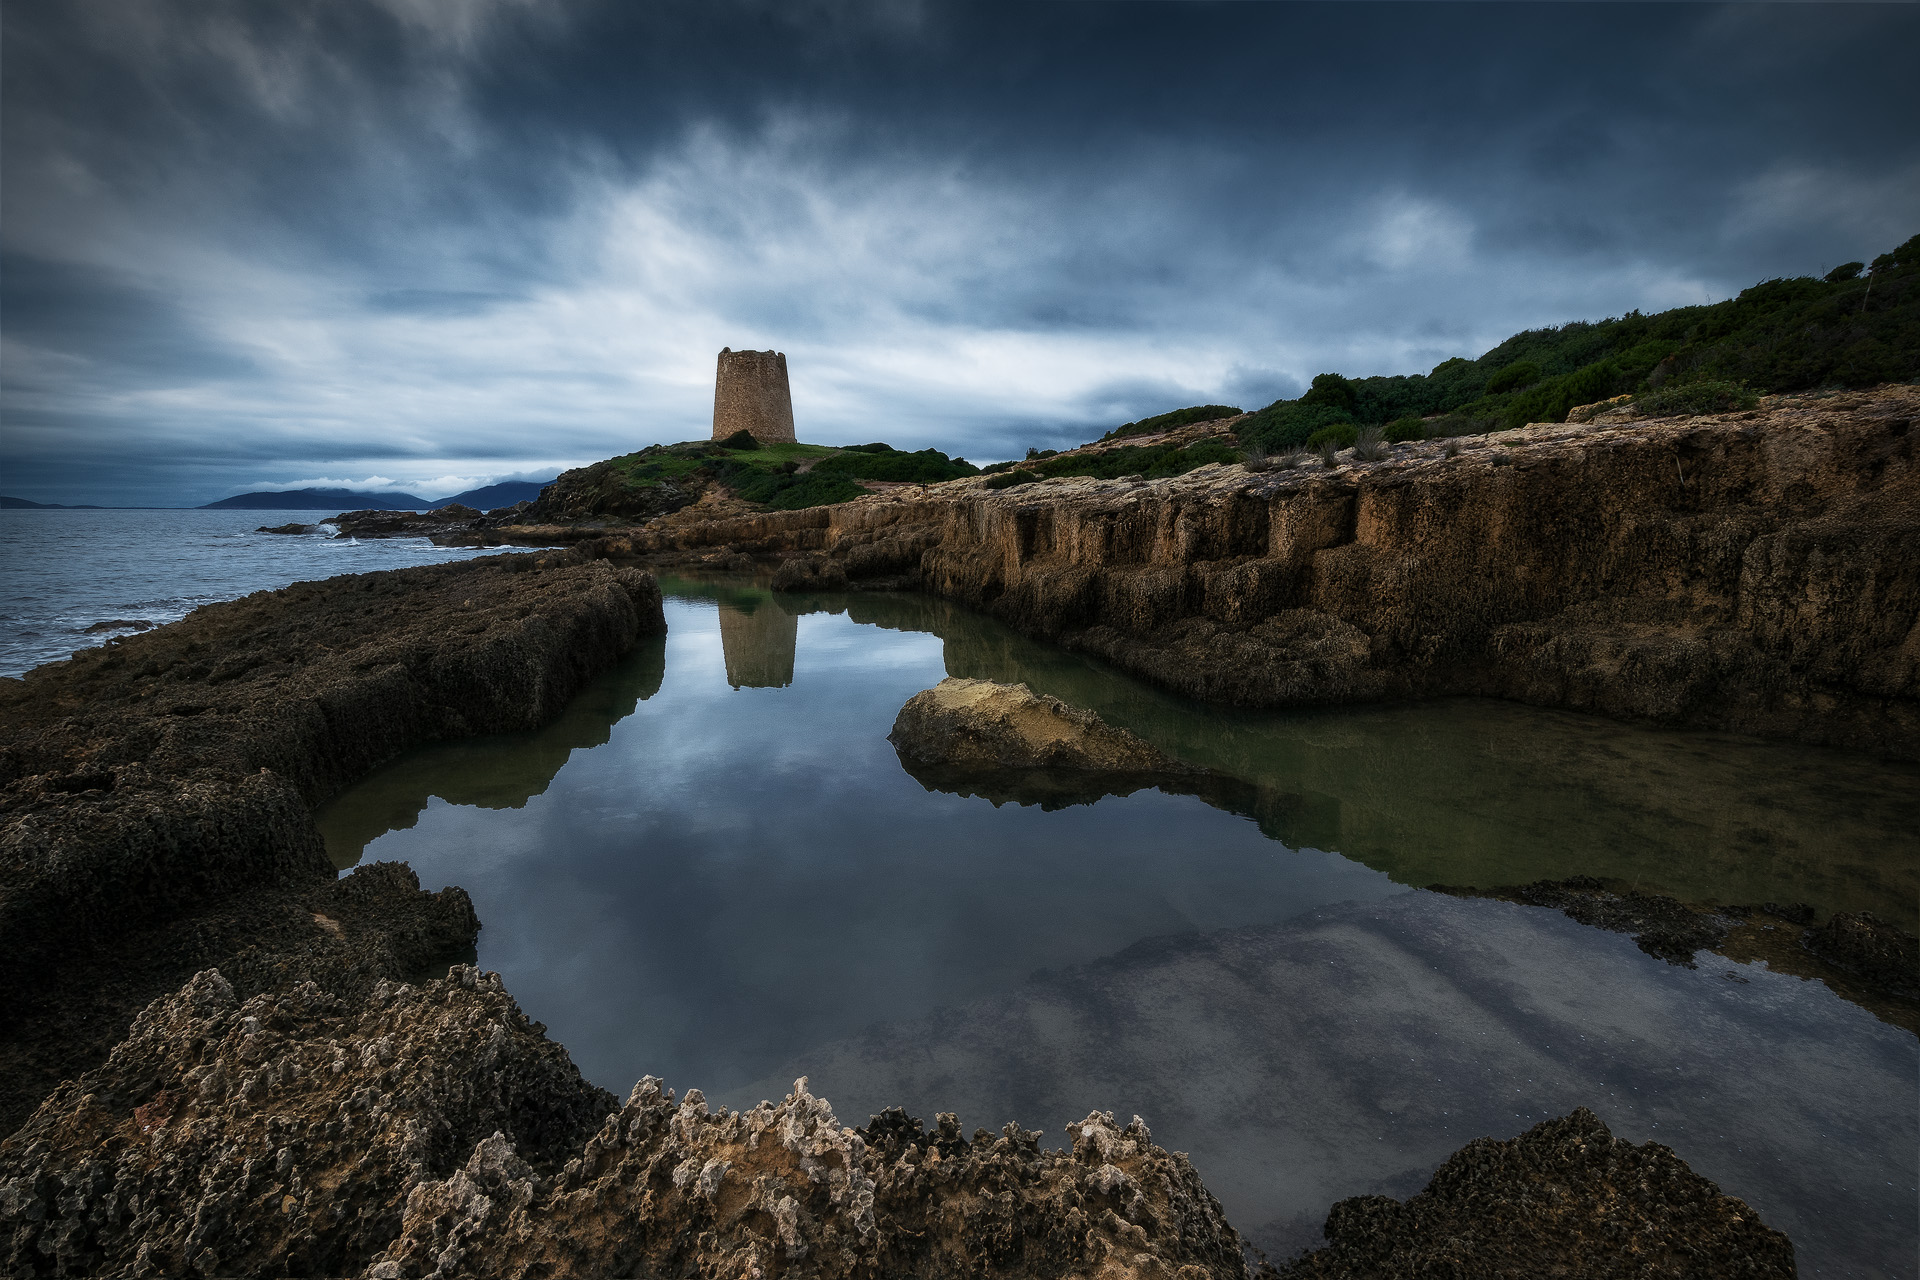 Pixinnì tower reflected in a natural pool...